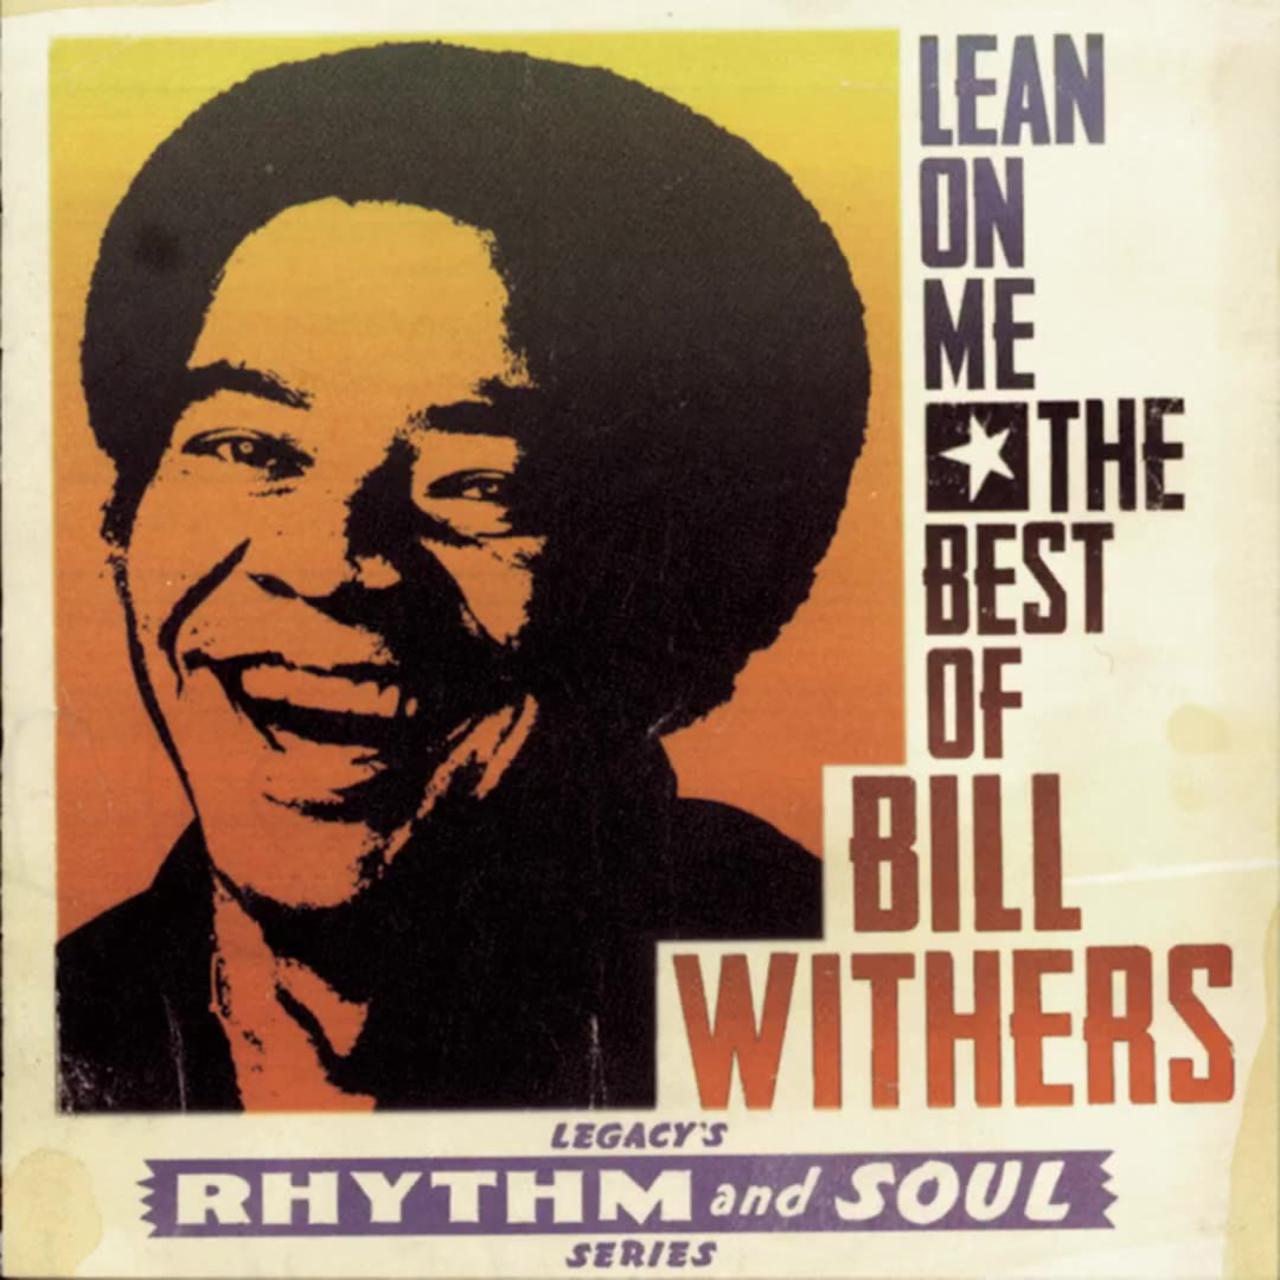 Just the two of us - Bill Withers